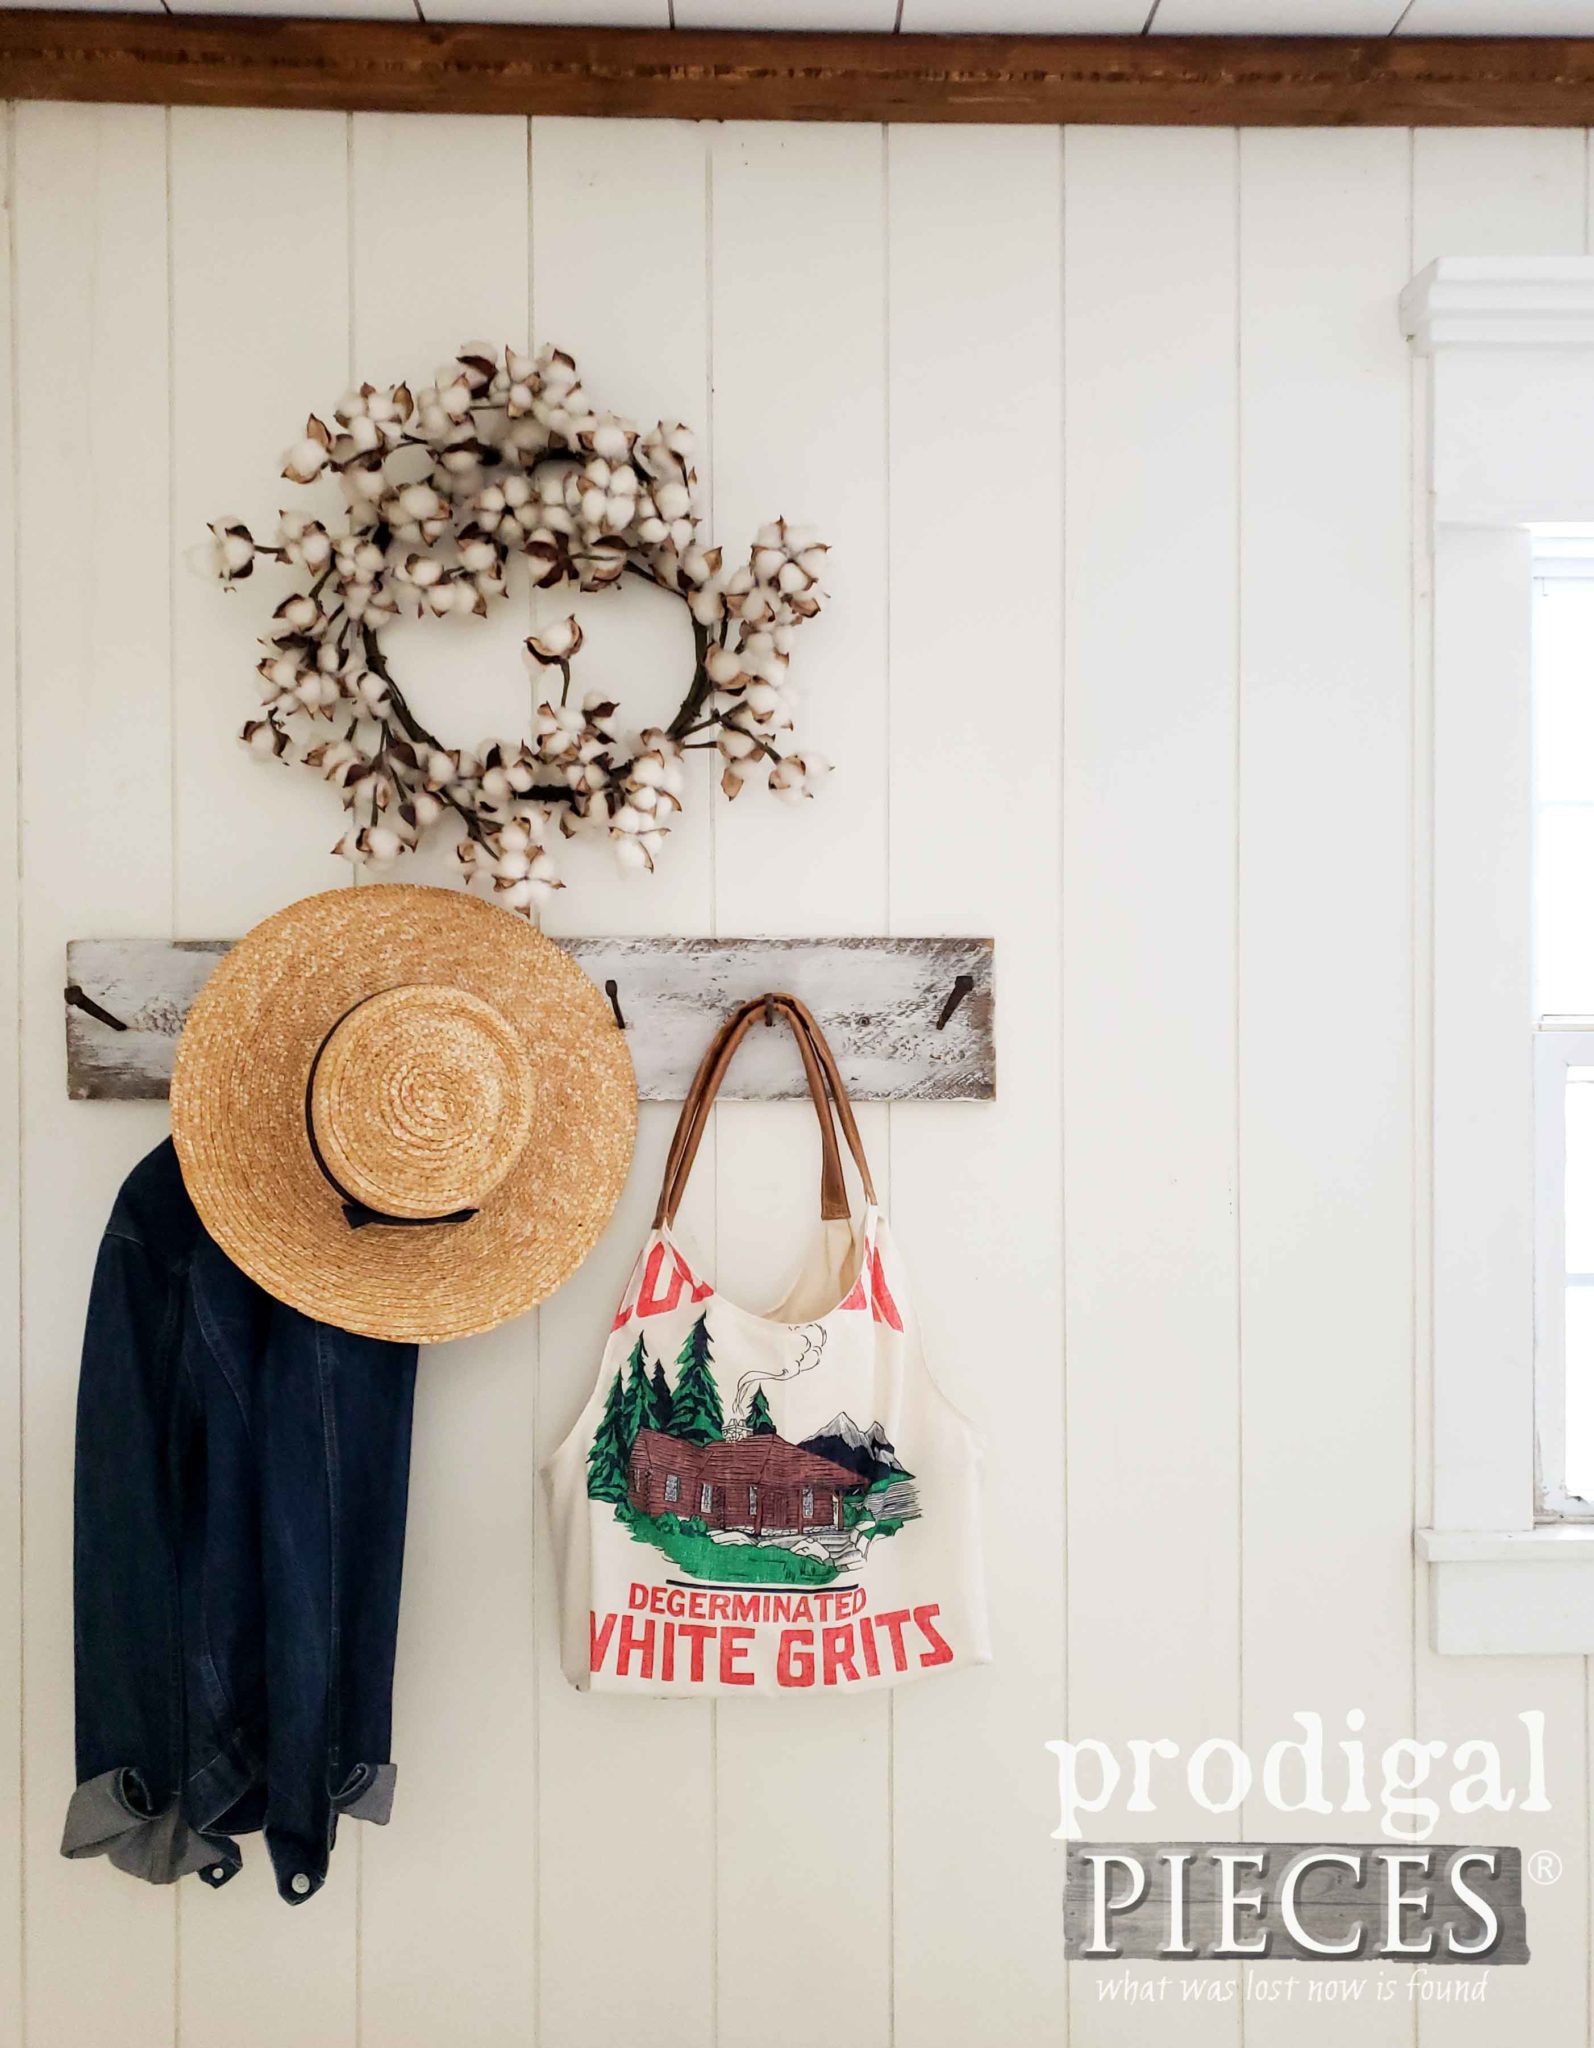 Farmhouse Style Handmade Fashion Feed Sack Tote Bag Created by Larissa of Prodigal Pieces | prodigalpieces.com #prodigalpieces #diy #handmade #fashion #style #bag #farmhouse #upcycled